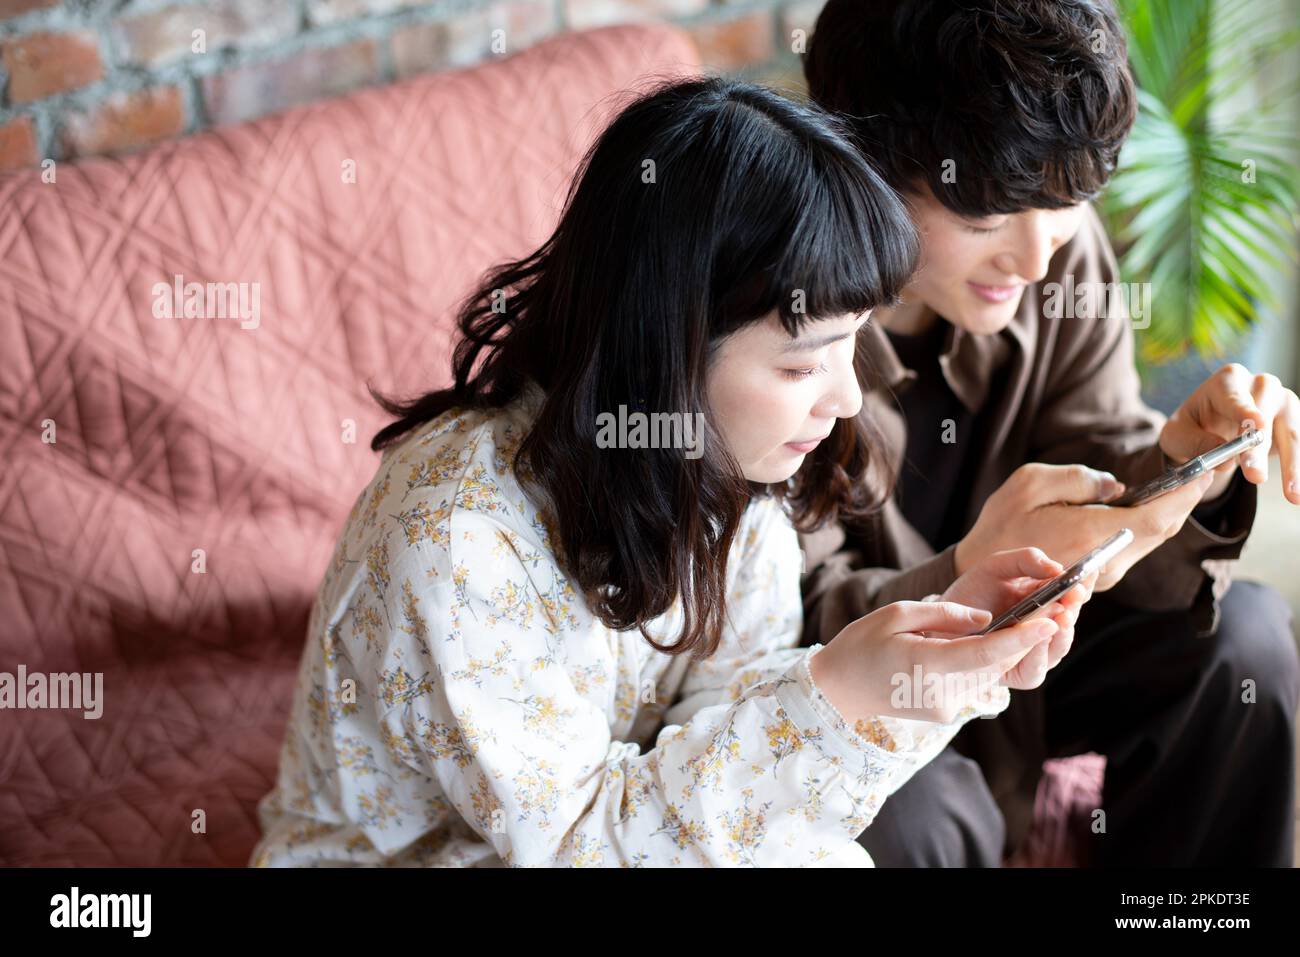 Couple looking at their phones at home Stock Photo